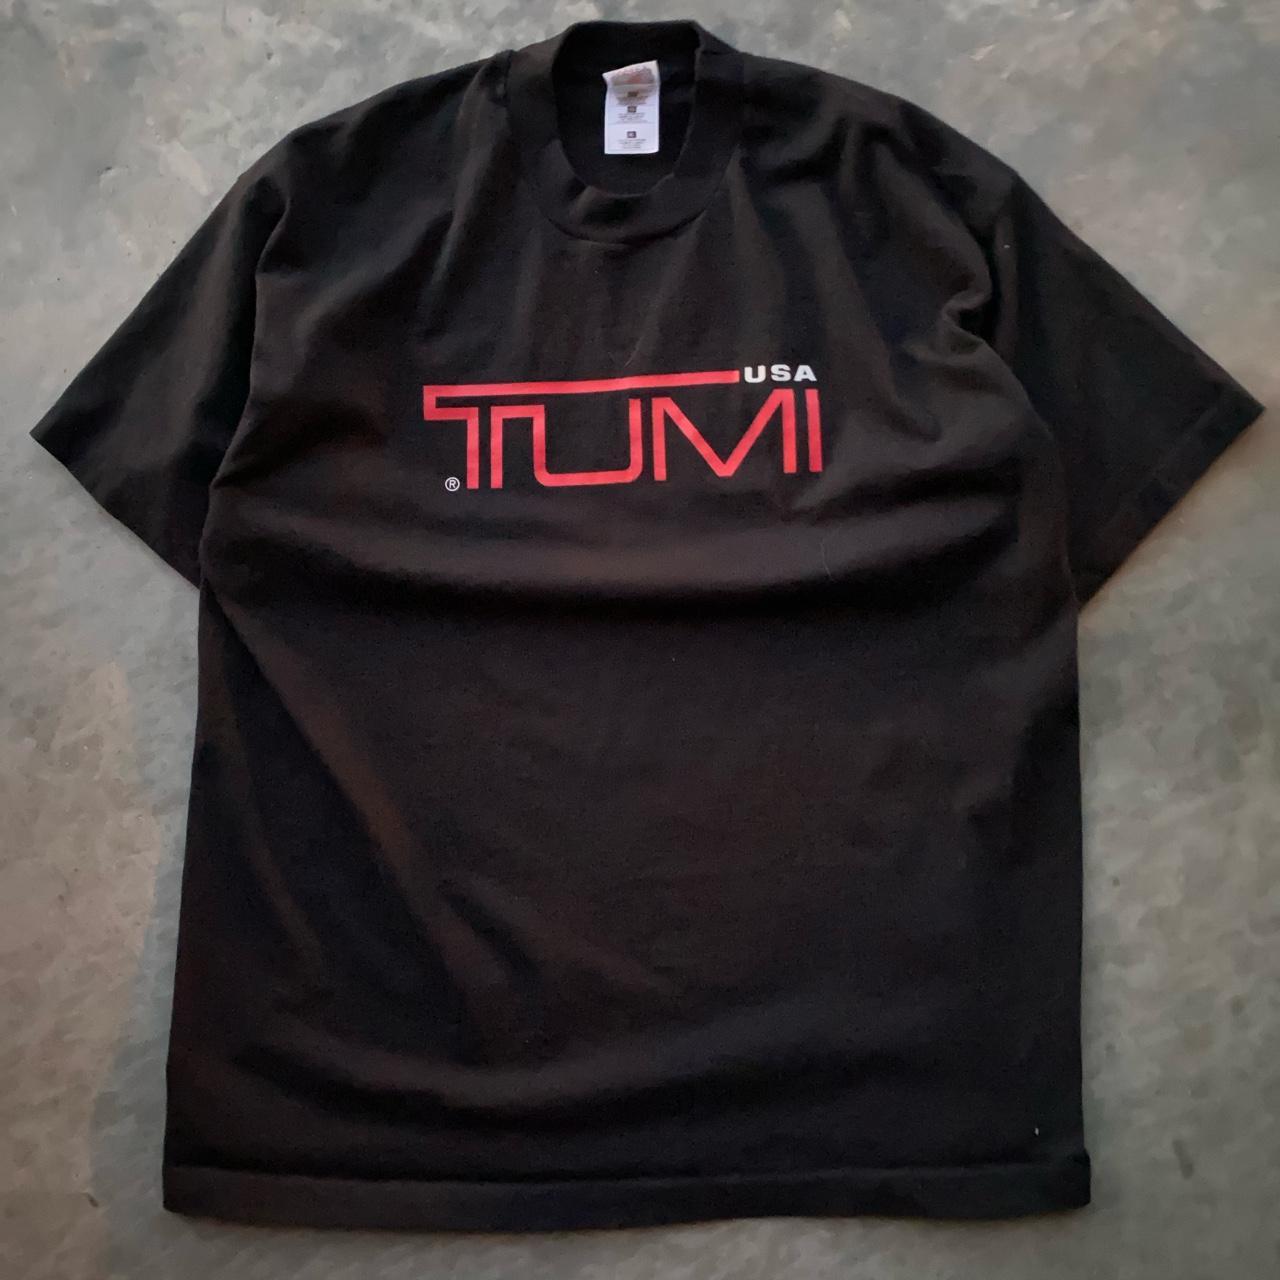 Tumi Men's Black and Red T-shirt